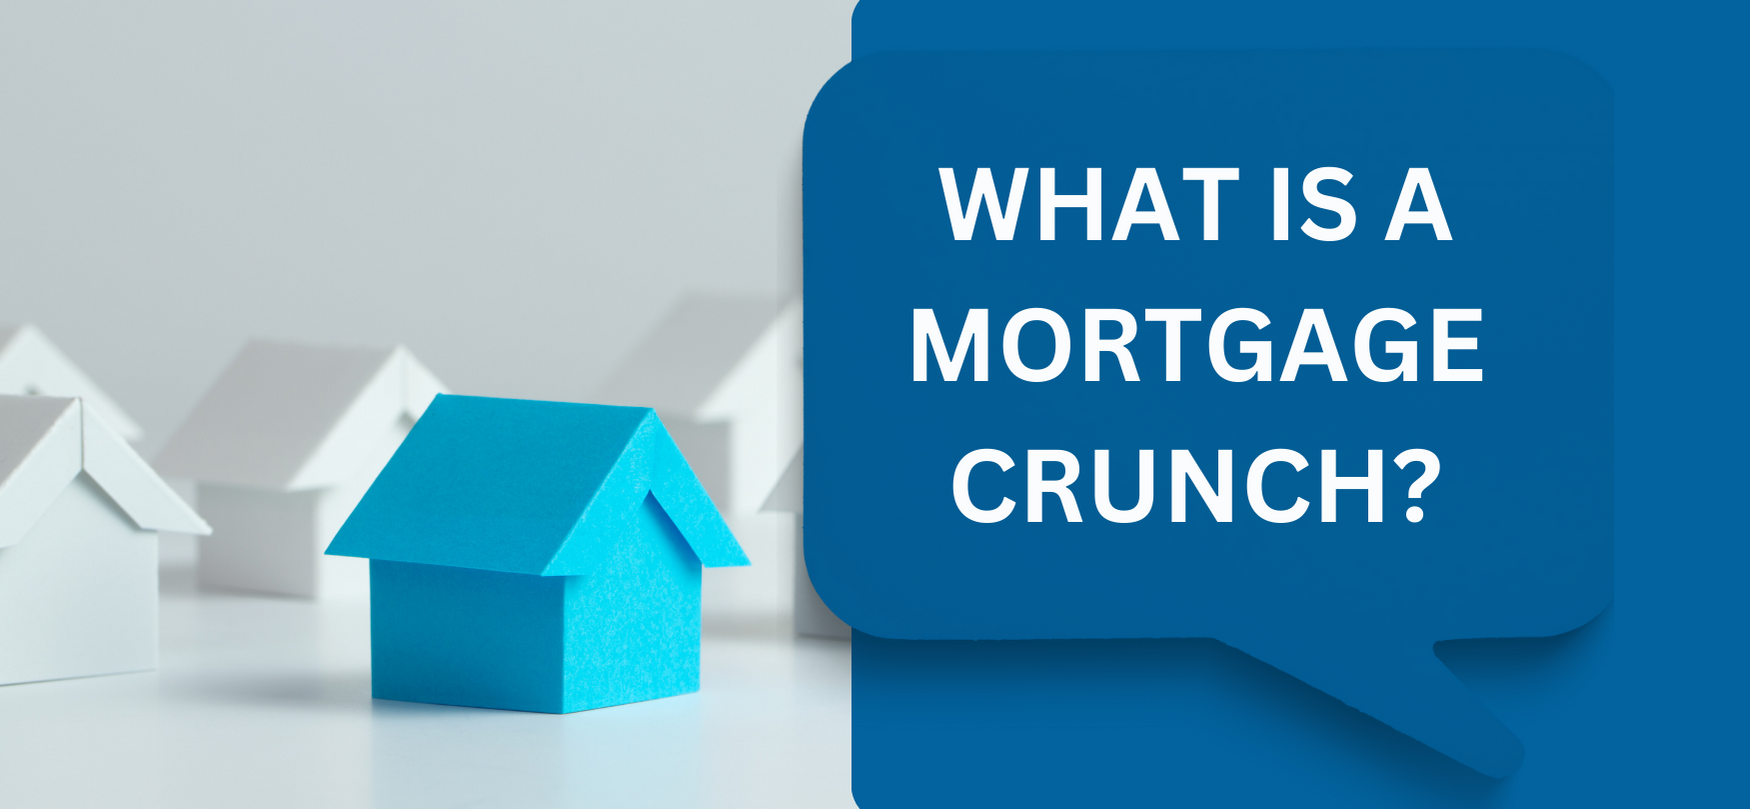 What is a mortgage crunch